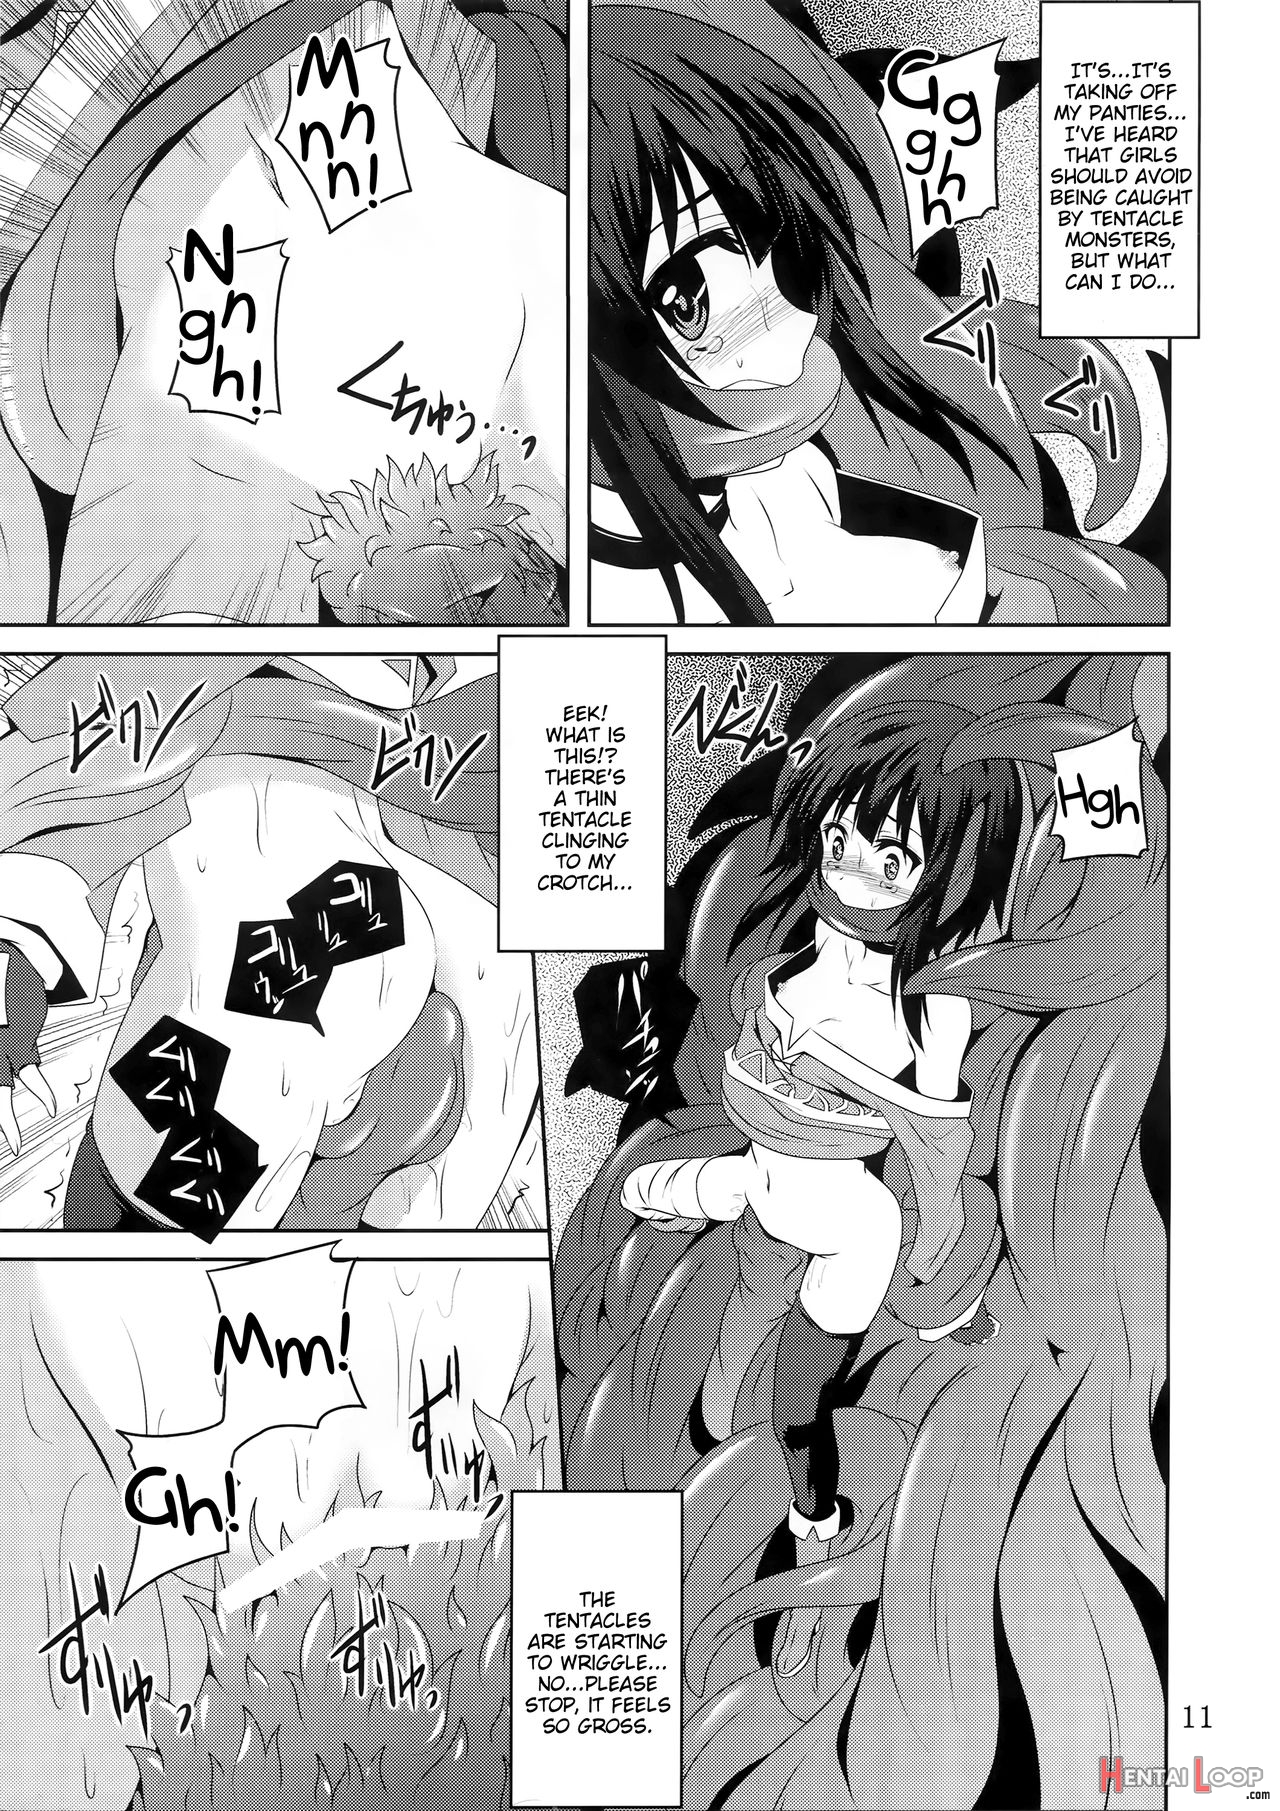 Blessing Upon Megumin And The Tentacle page 8